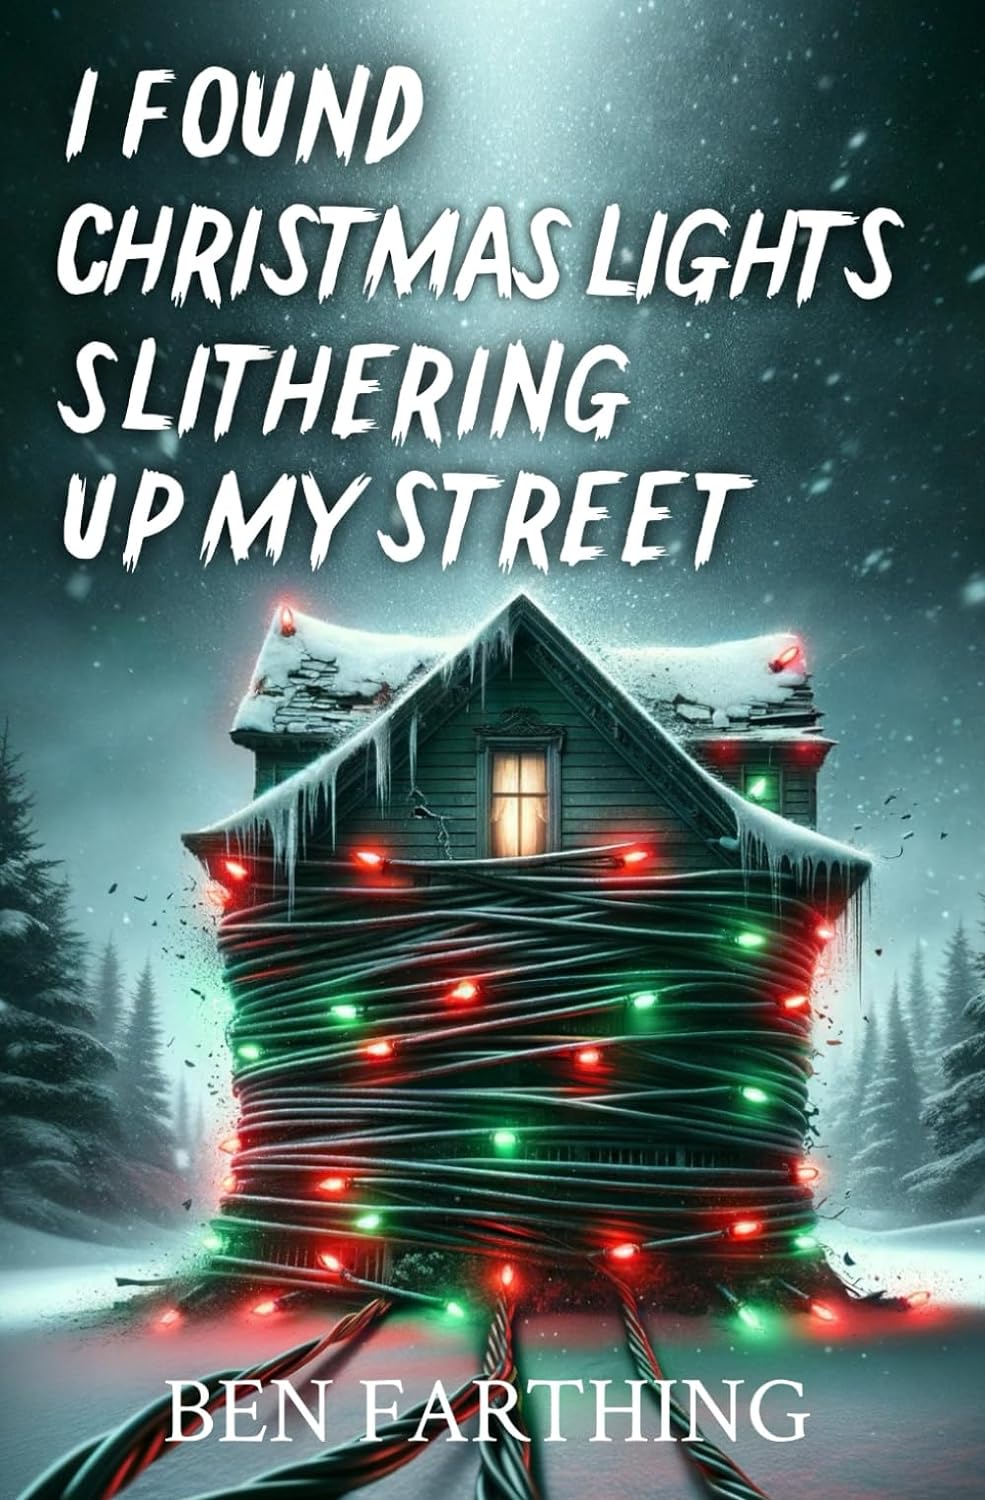 I Found Christmas Lights Slithering Up My Street - Ben Farthing